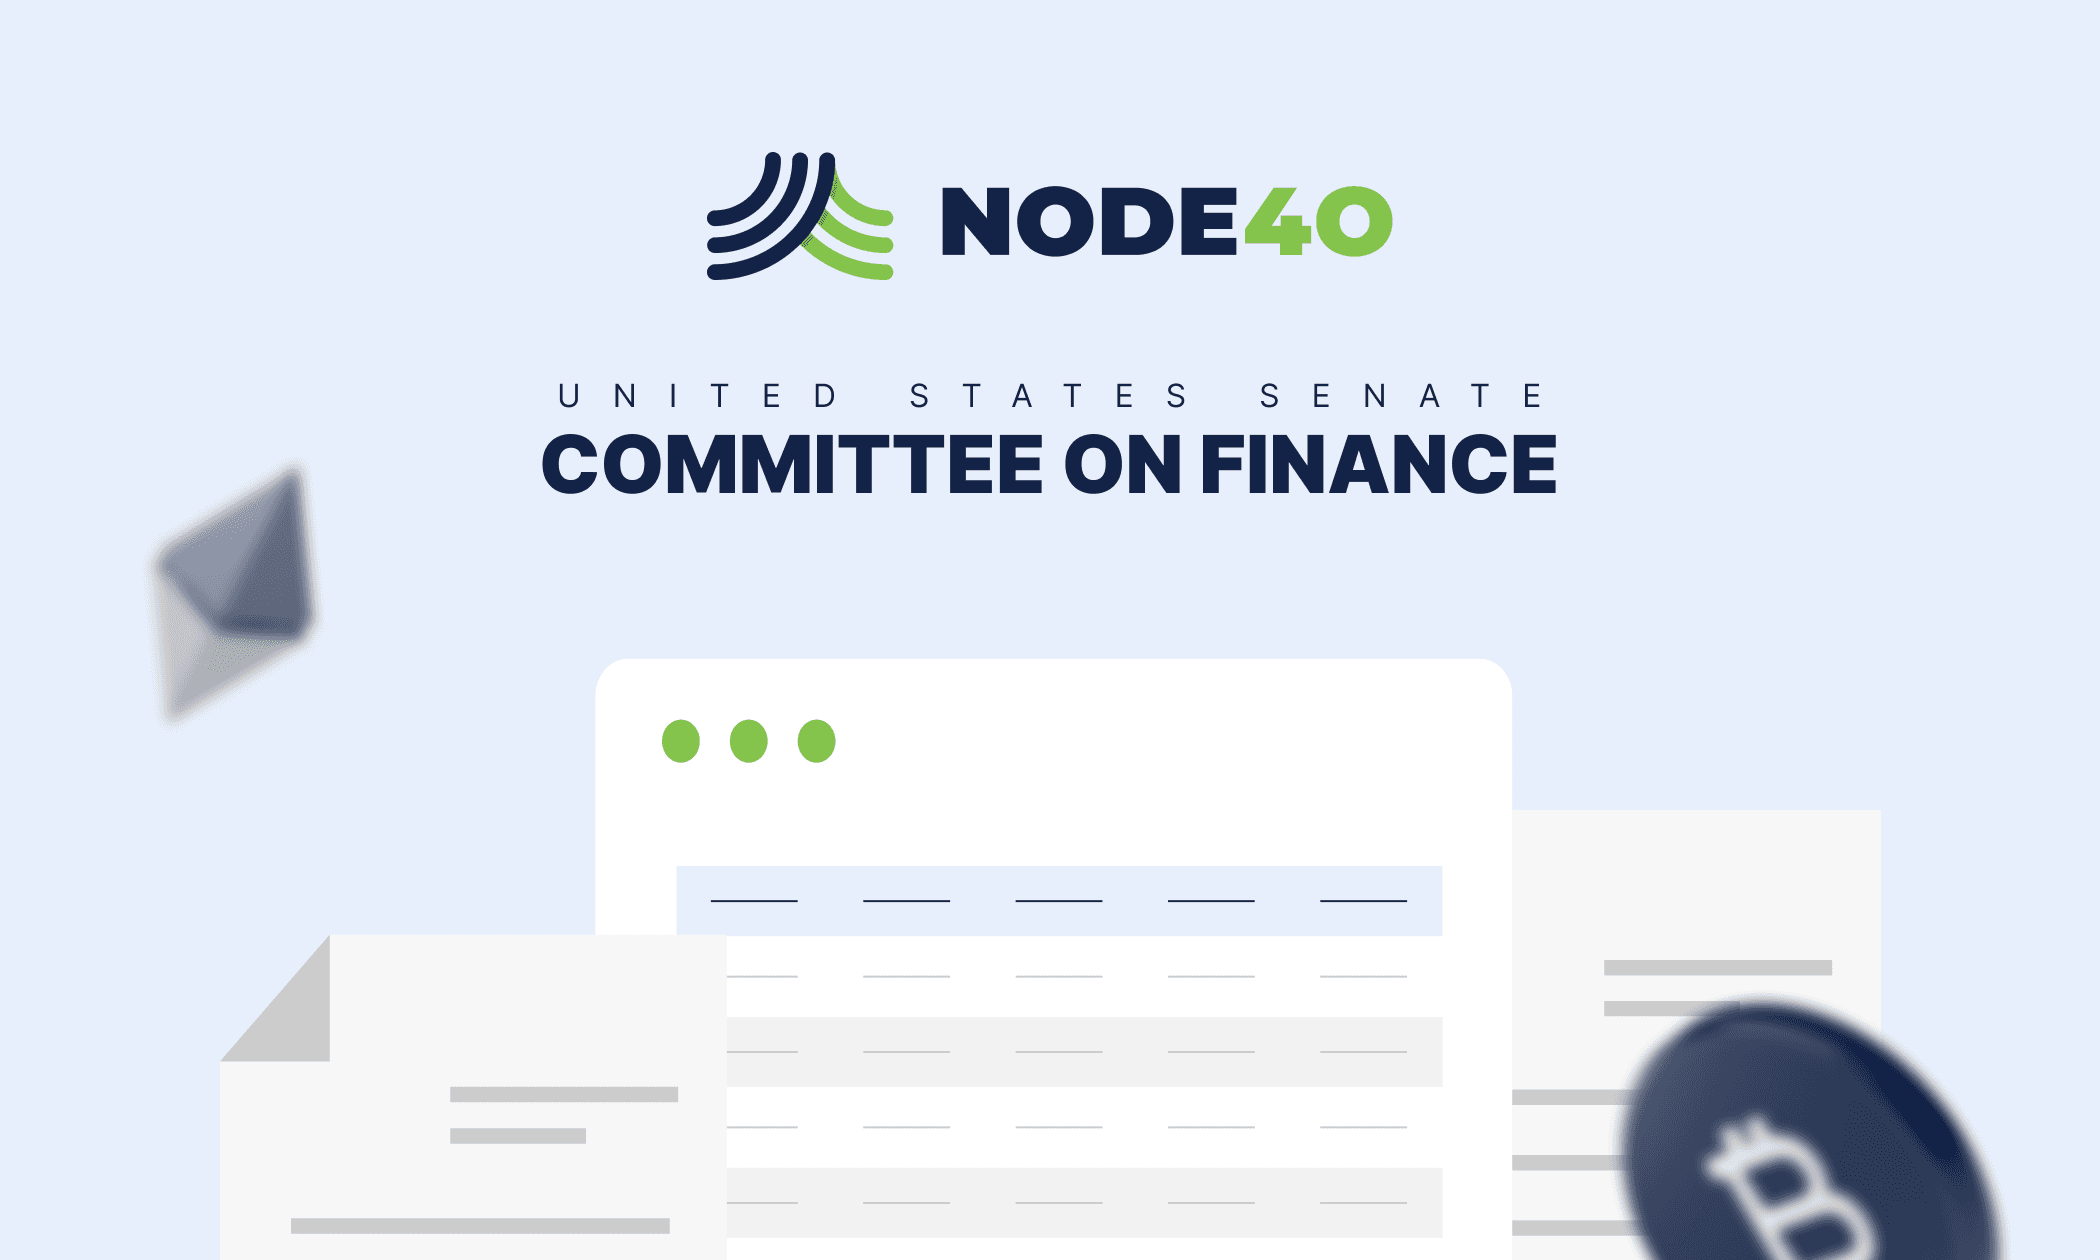 NODE40’s Letter to the Senate Finance Committee